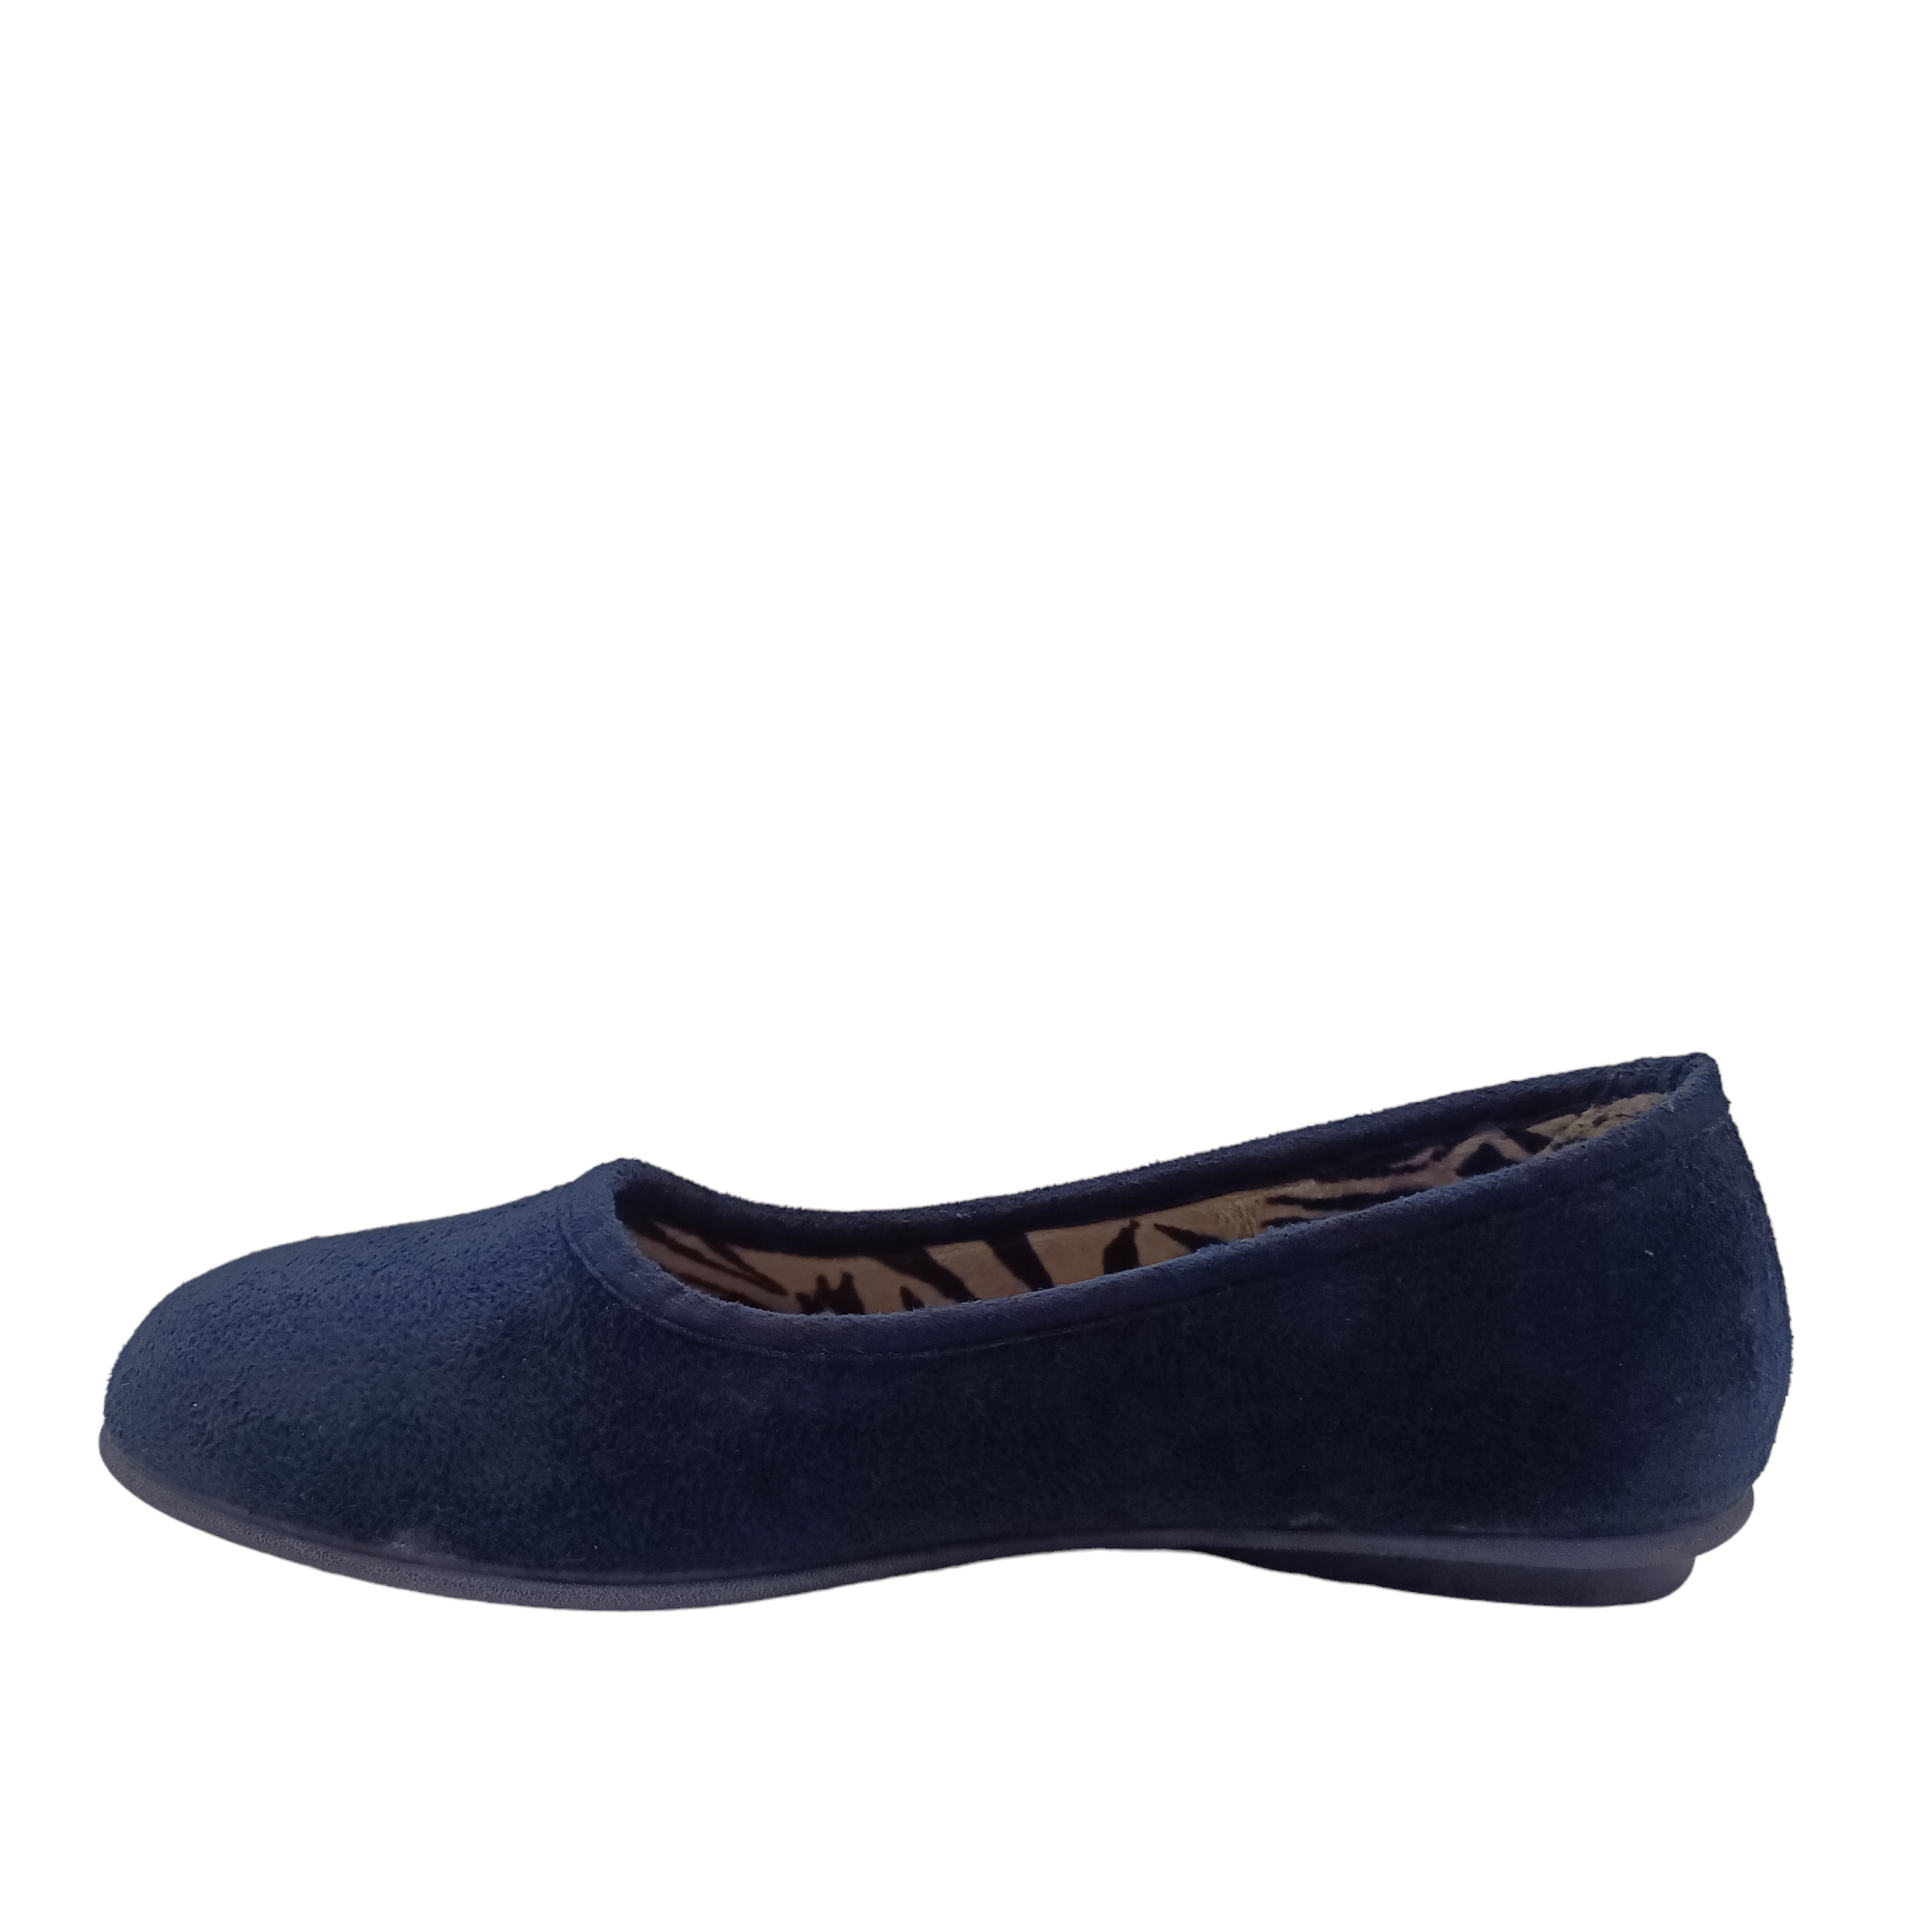 Side view of navy Nuzzle Slippers with zebra print lining. Shop Womens Slippers and Shoes Online and In-store with shoe&amp;me.